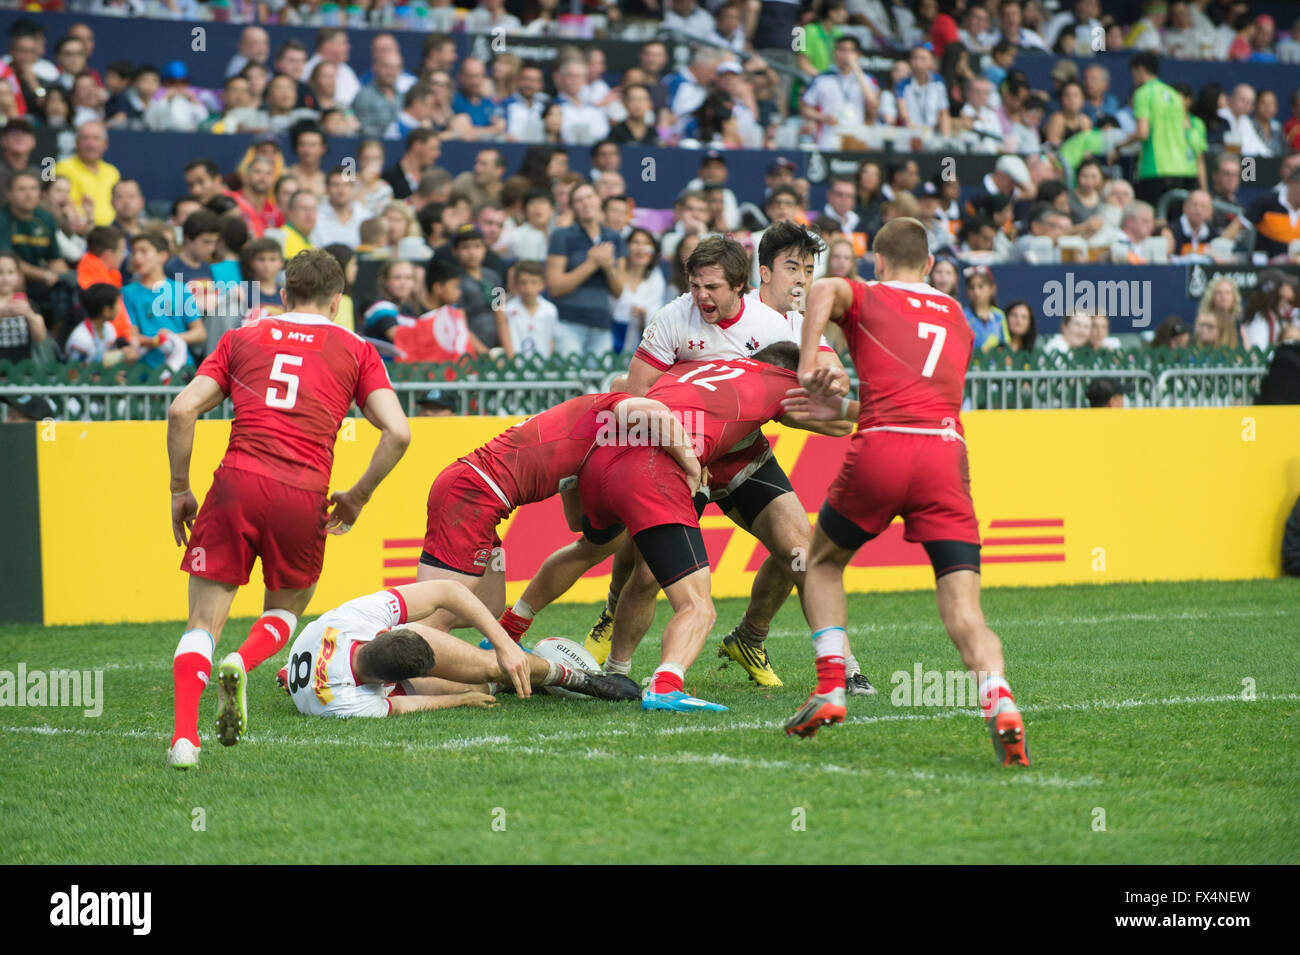 Hong Kong, China. 10, April, 2016. HSBC World Rugby Sevens Series-round 7, Hong Kong Stadium. Russia(red) vs Canada(white) Shield Final. Russia wins 19-14. Credit:  Gerry Rousseau/Alamy Live News Stock Photo